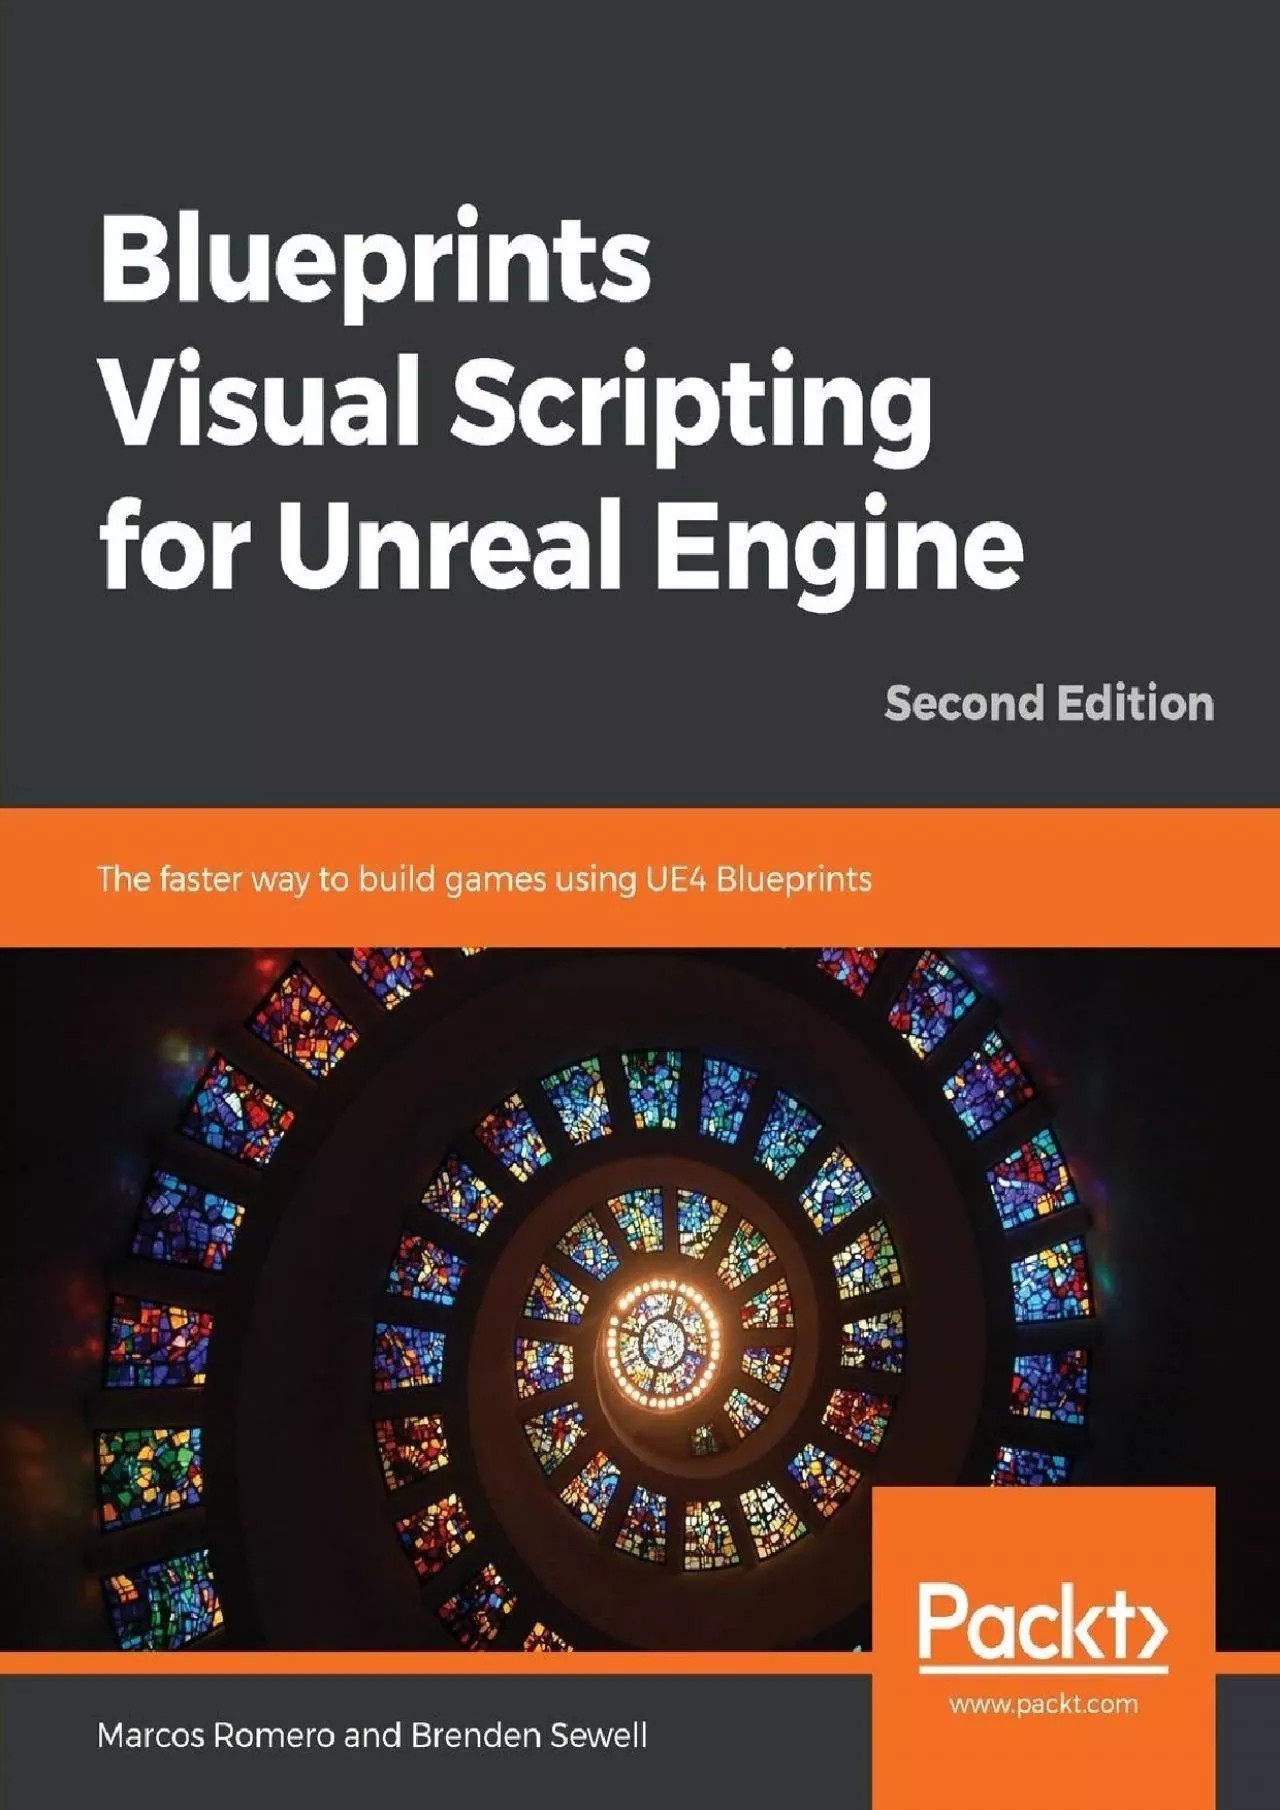 [BEST]-Blueprints Visual Scripting for Unreal Engine: The faster way to build games using